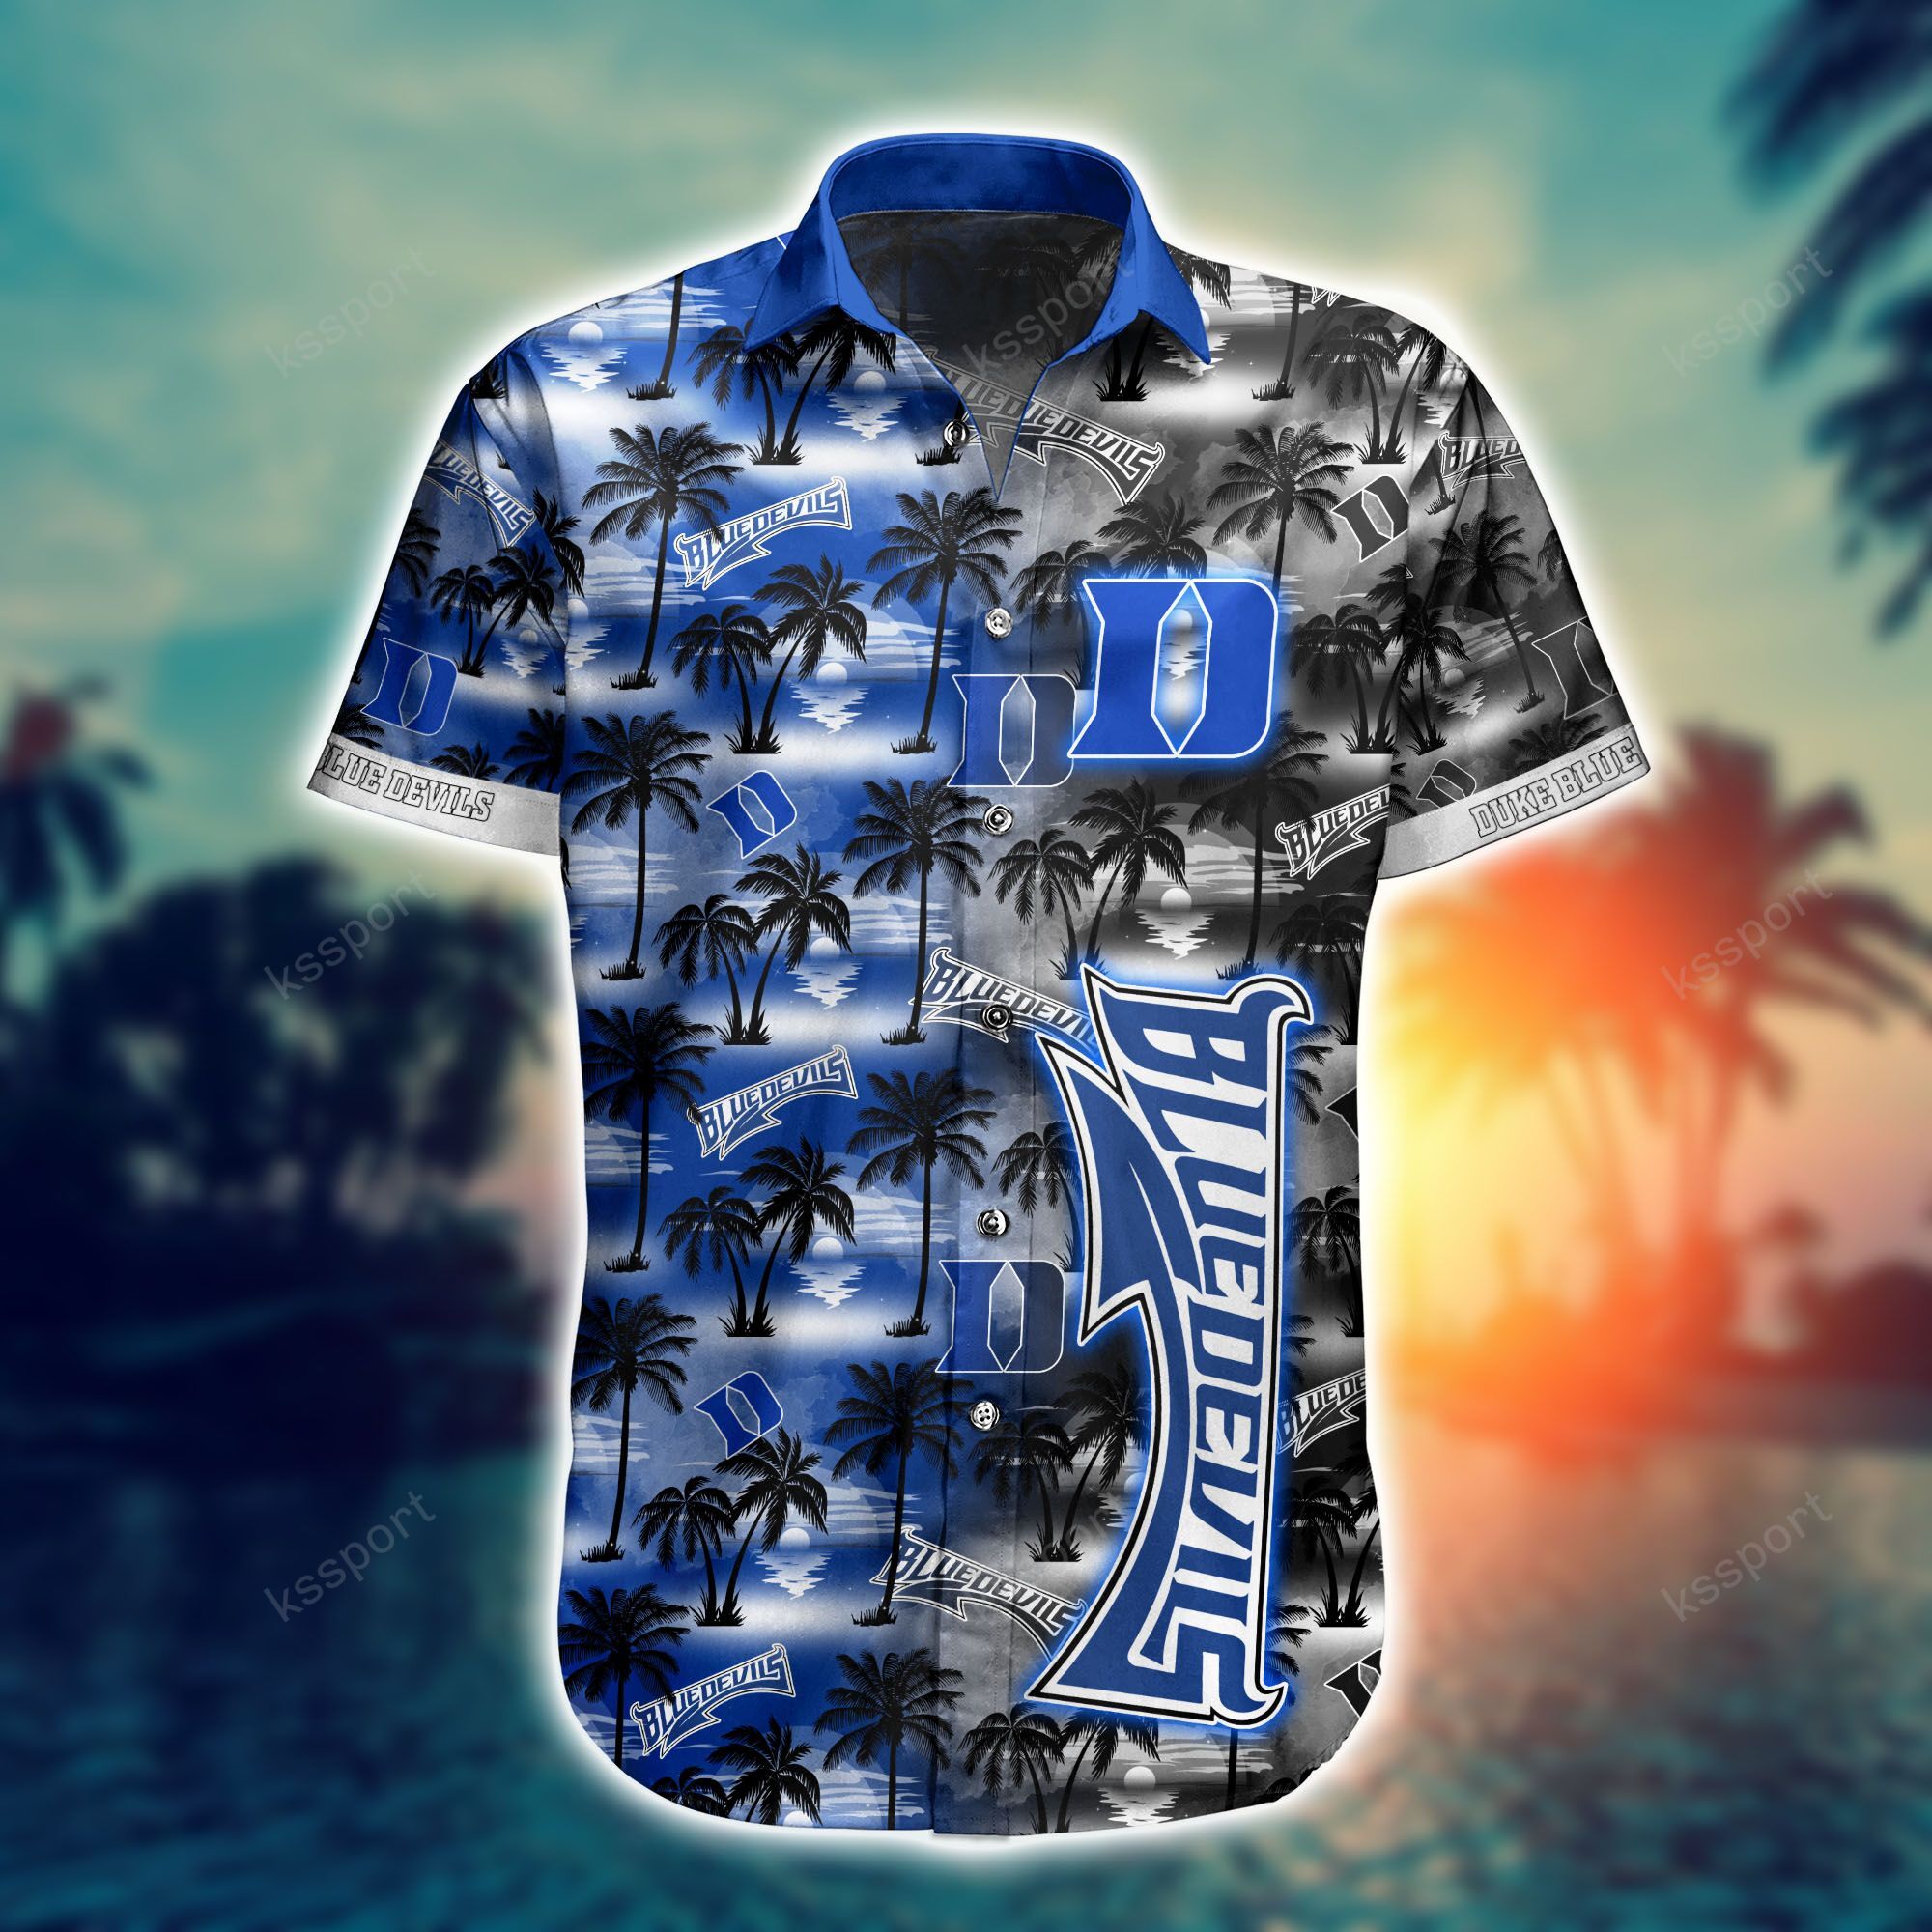 Top cool Hawaiian shirt 2022 - Make sure you get yours today before they run out! 132